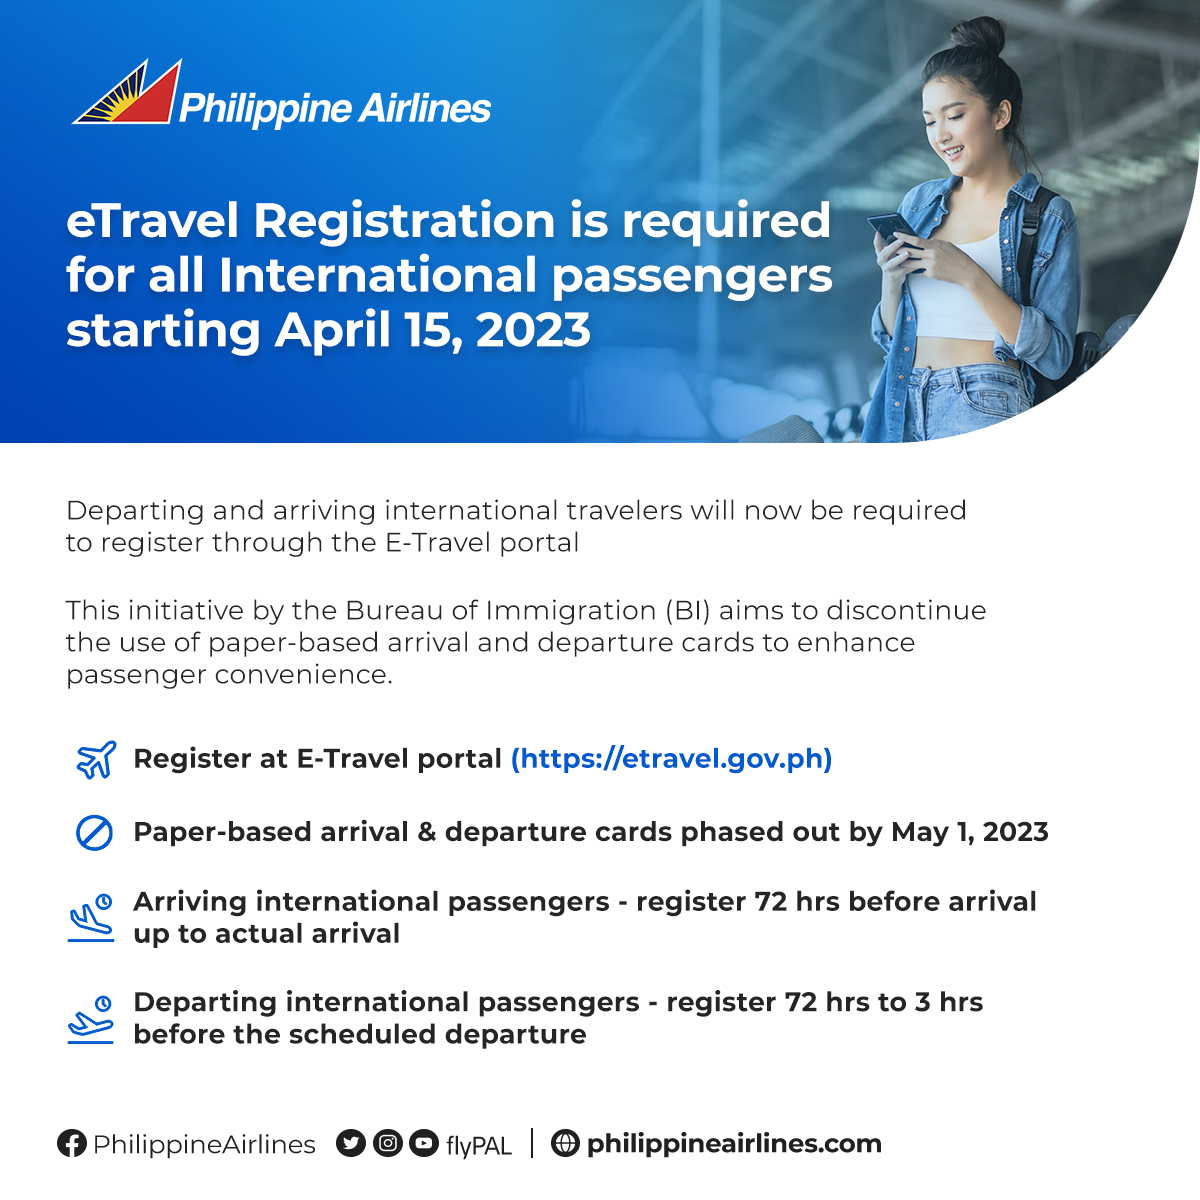 Starting April 15, 2023, departing and arriving international travelers will now be required to register through the E-Travel portal (etravel.gov.ph). #DiscoverNew #PALat82